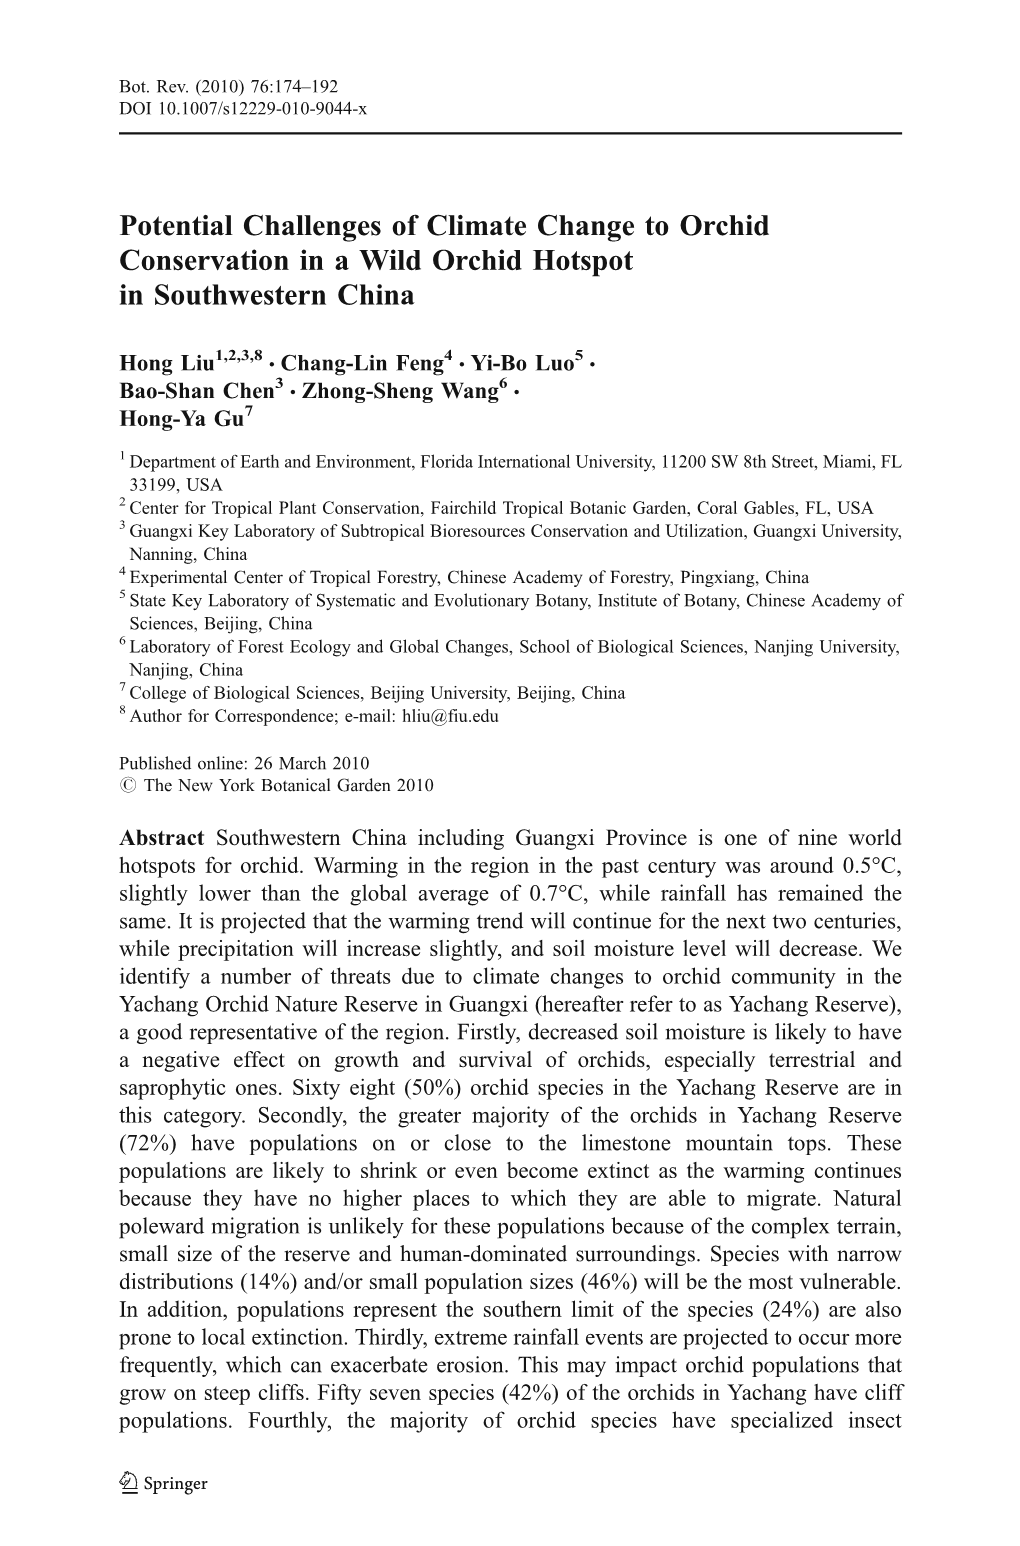 Potential Challenges of Climate Change to Orchid Conservation in a Wild Orchid Hotspot in Southwestern China